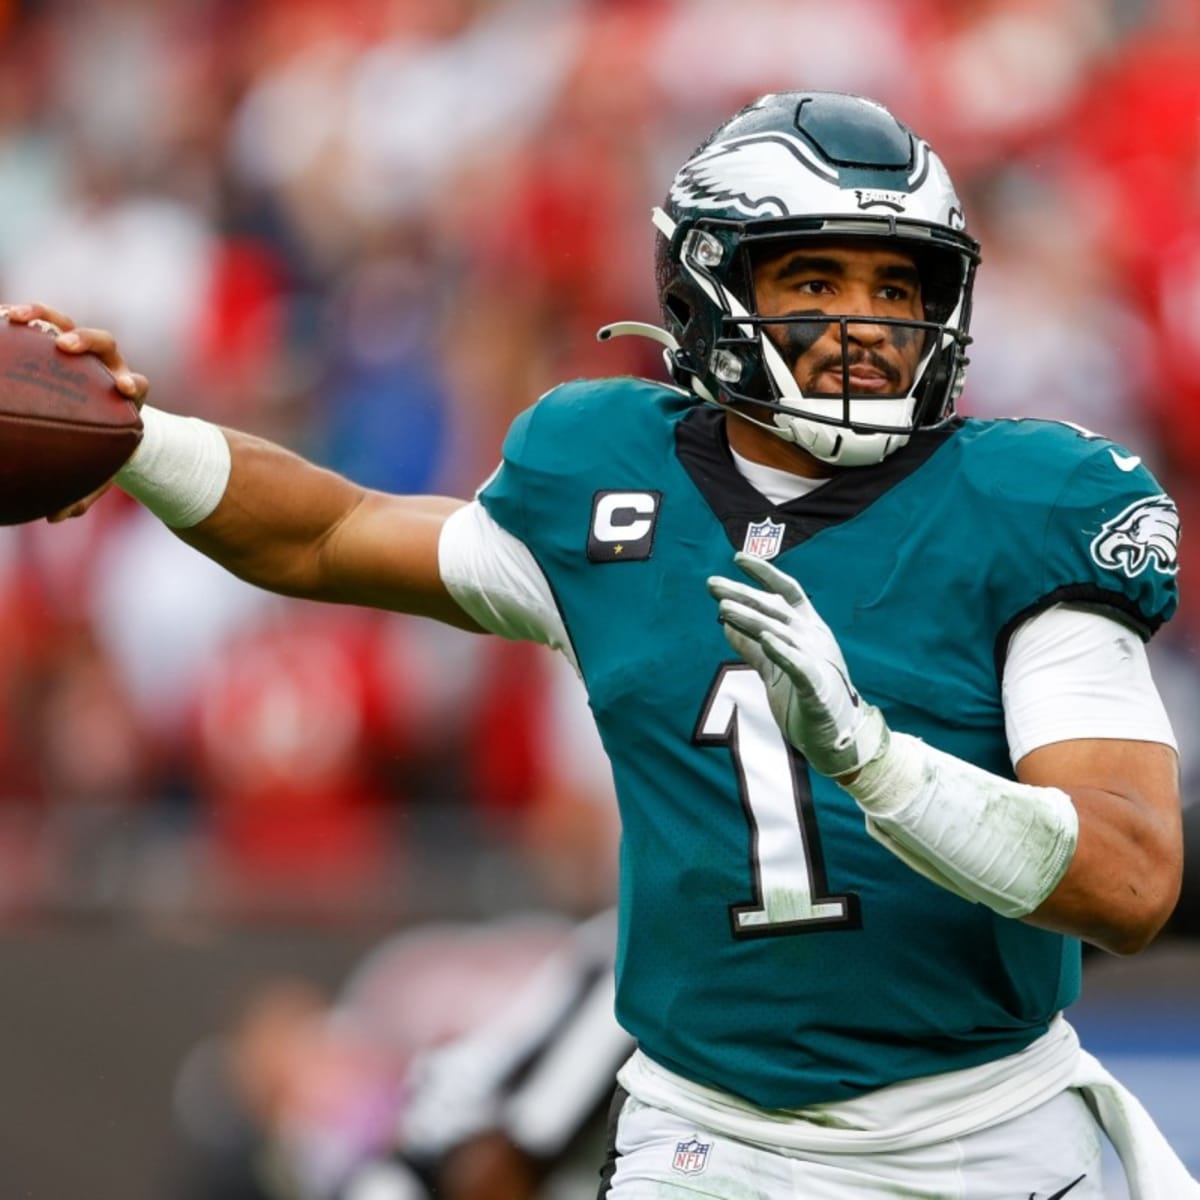 Report: Eagles GM Less Confident in Jalen Hurts as QB Next Year